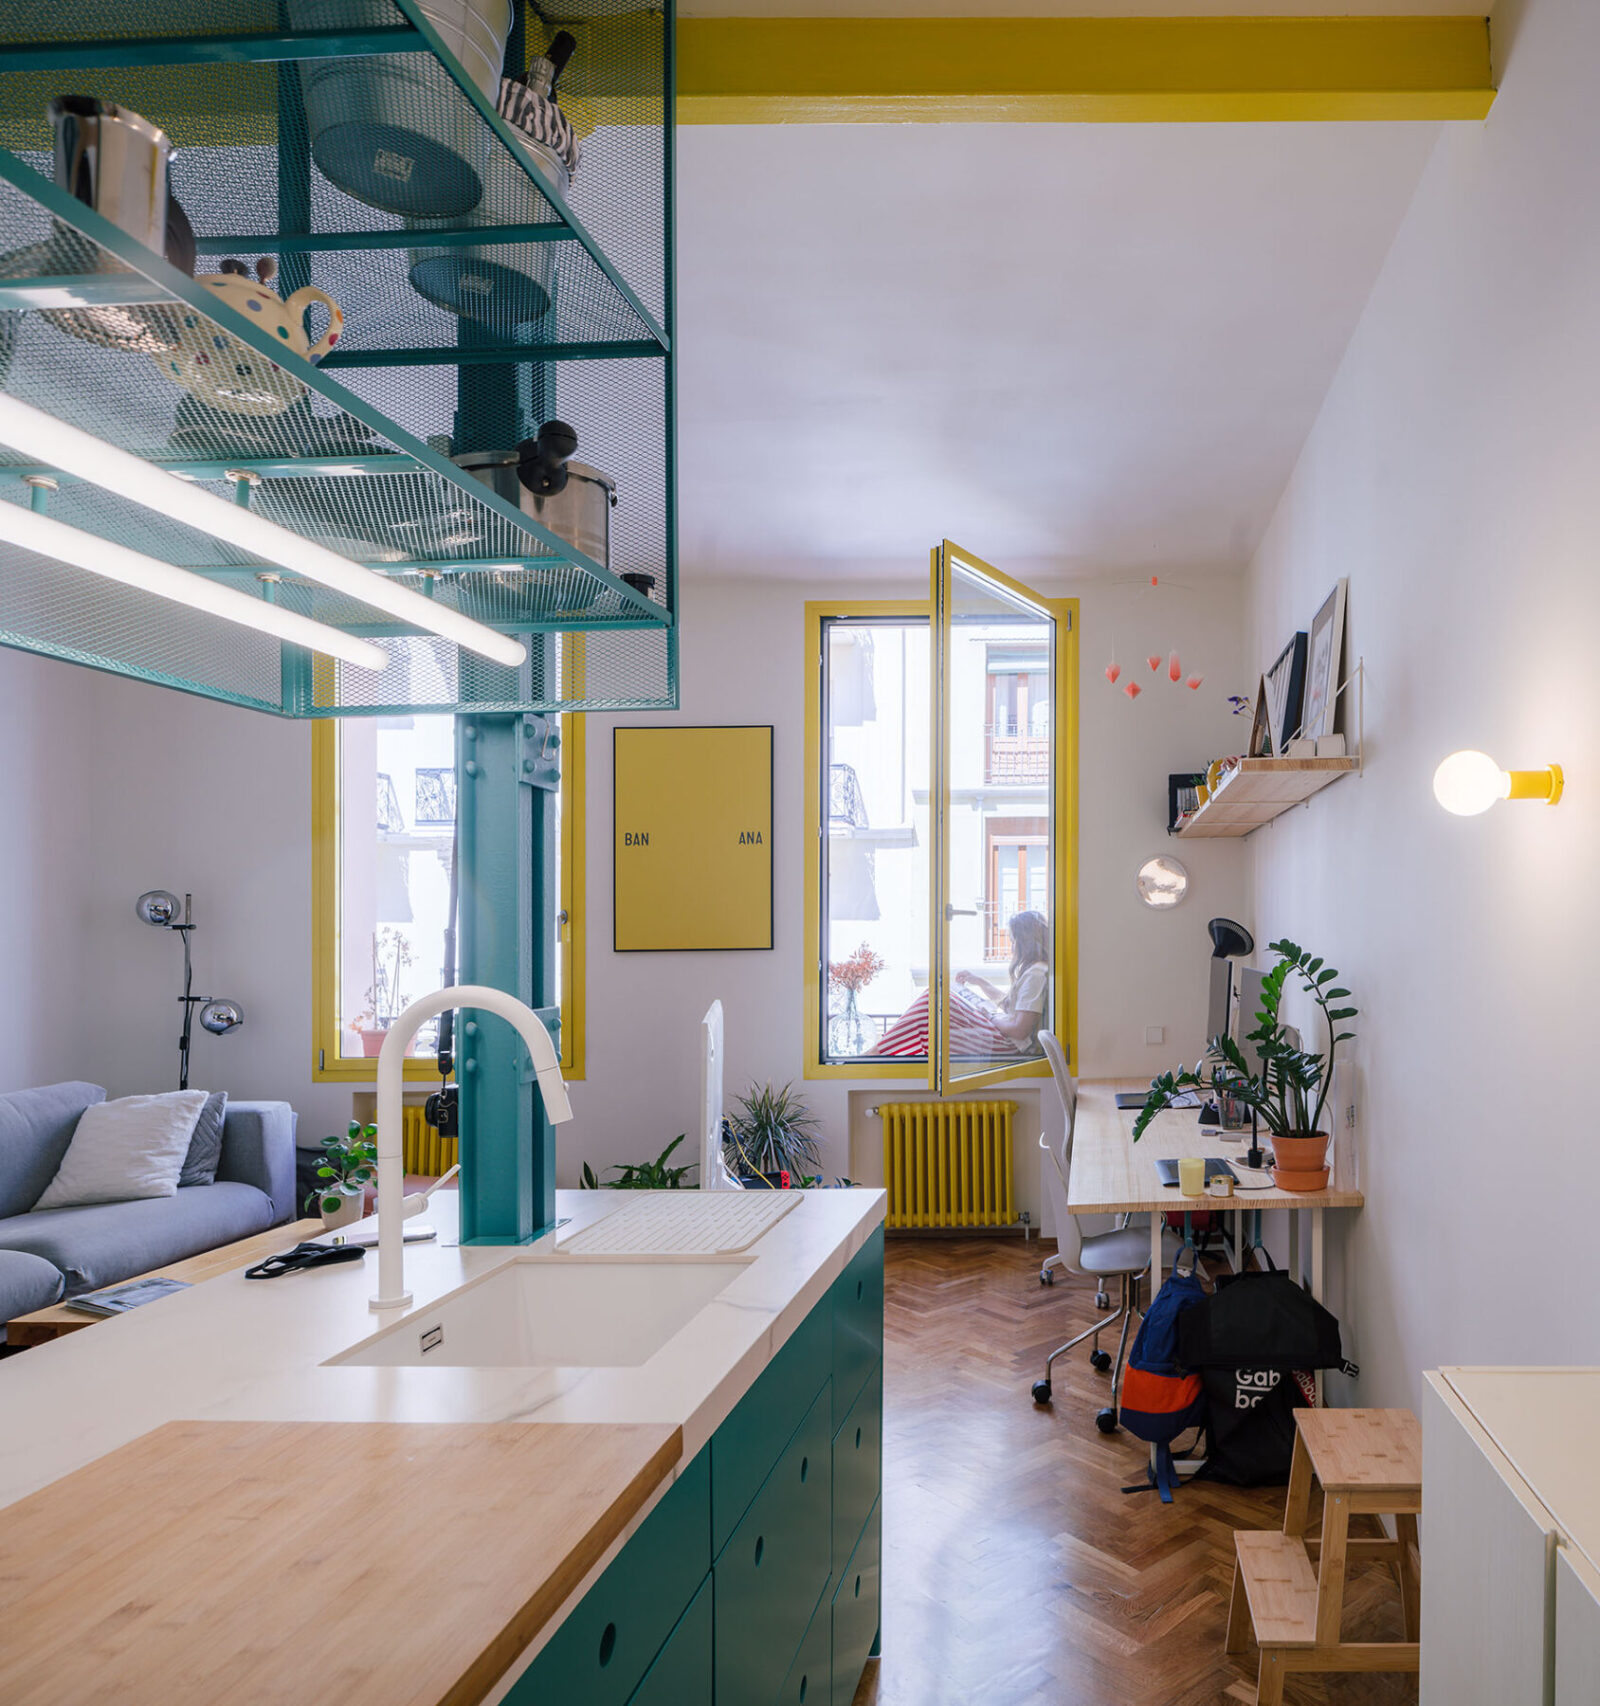 Archisearch The Magic Wall apartment renovation in Madrid, Spain | Impepinable